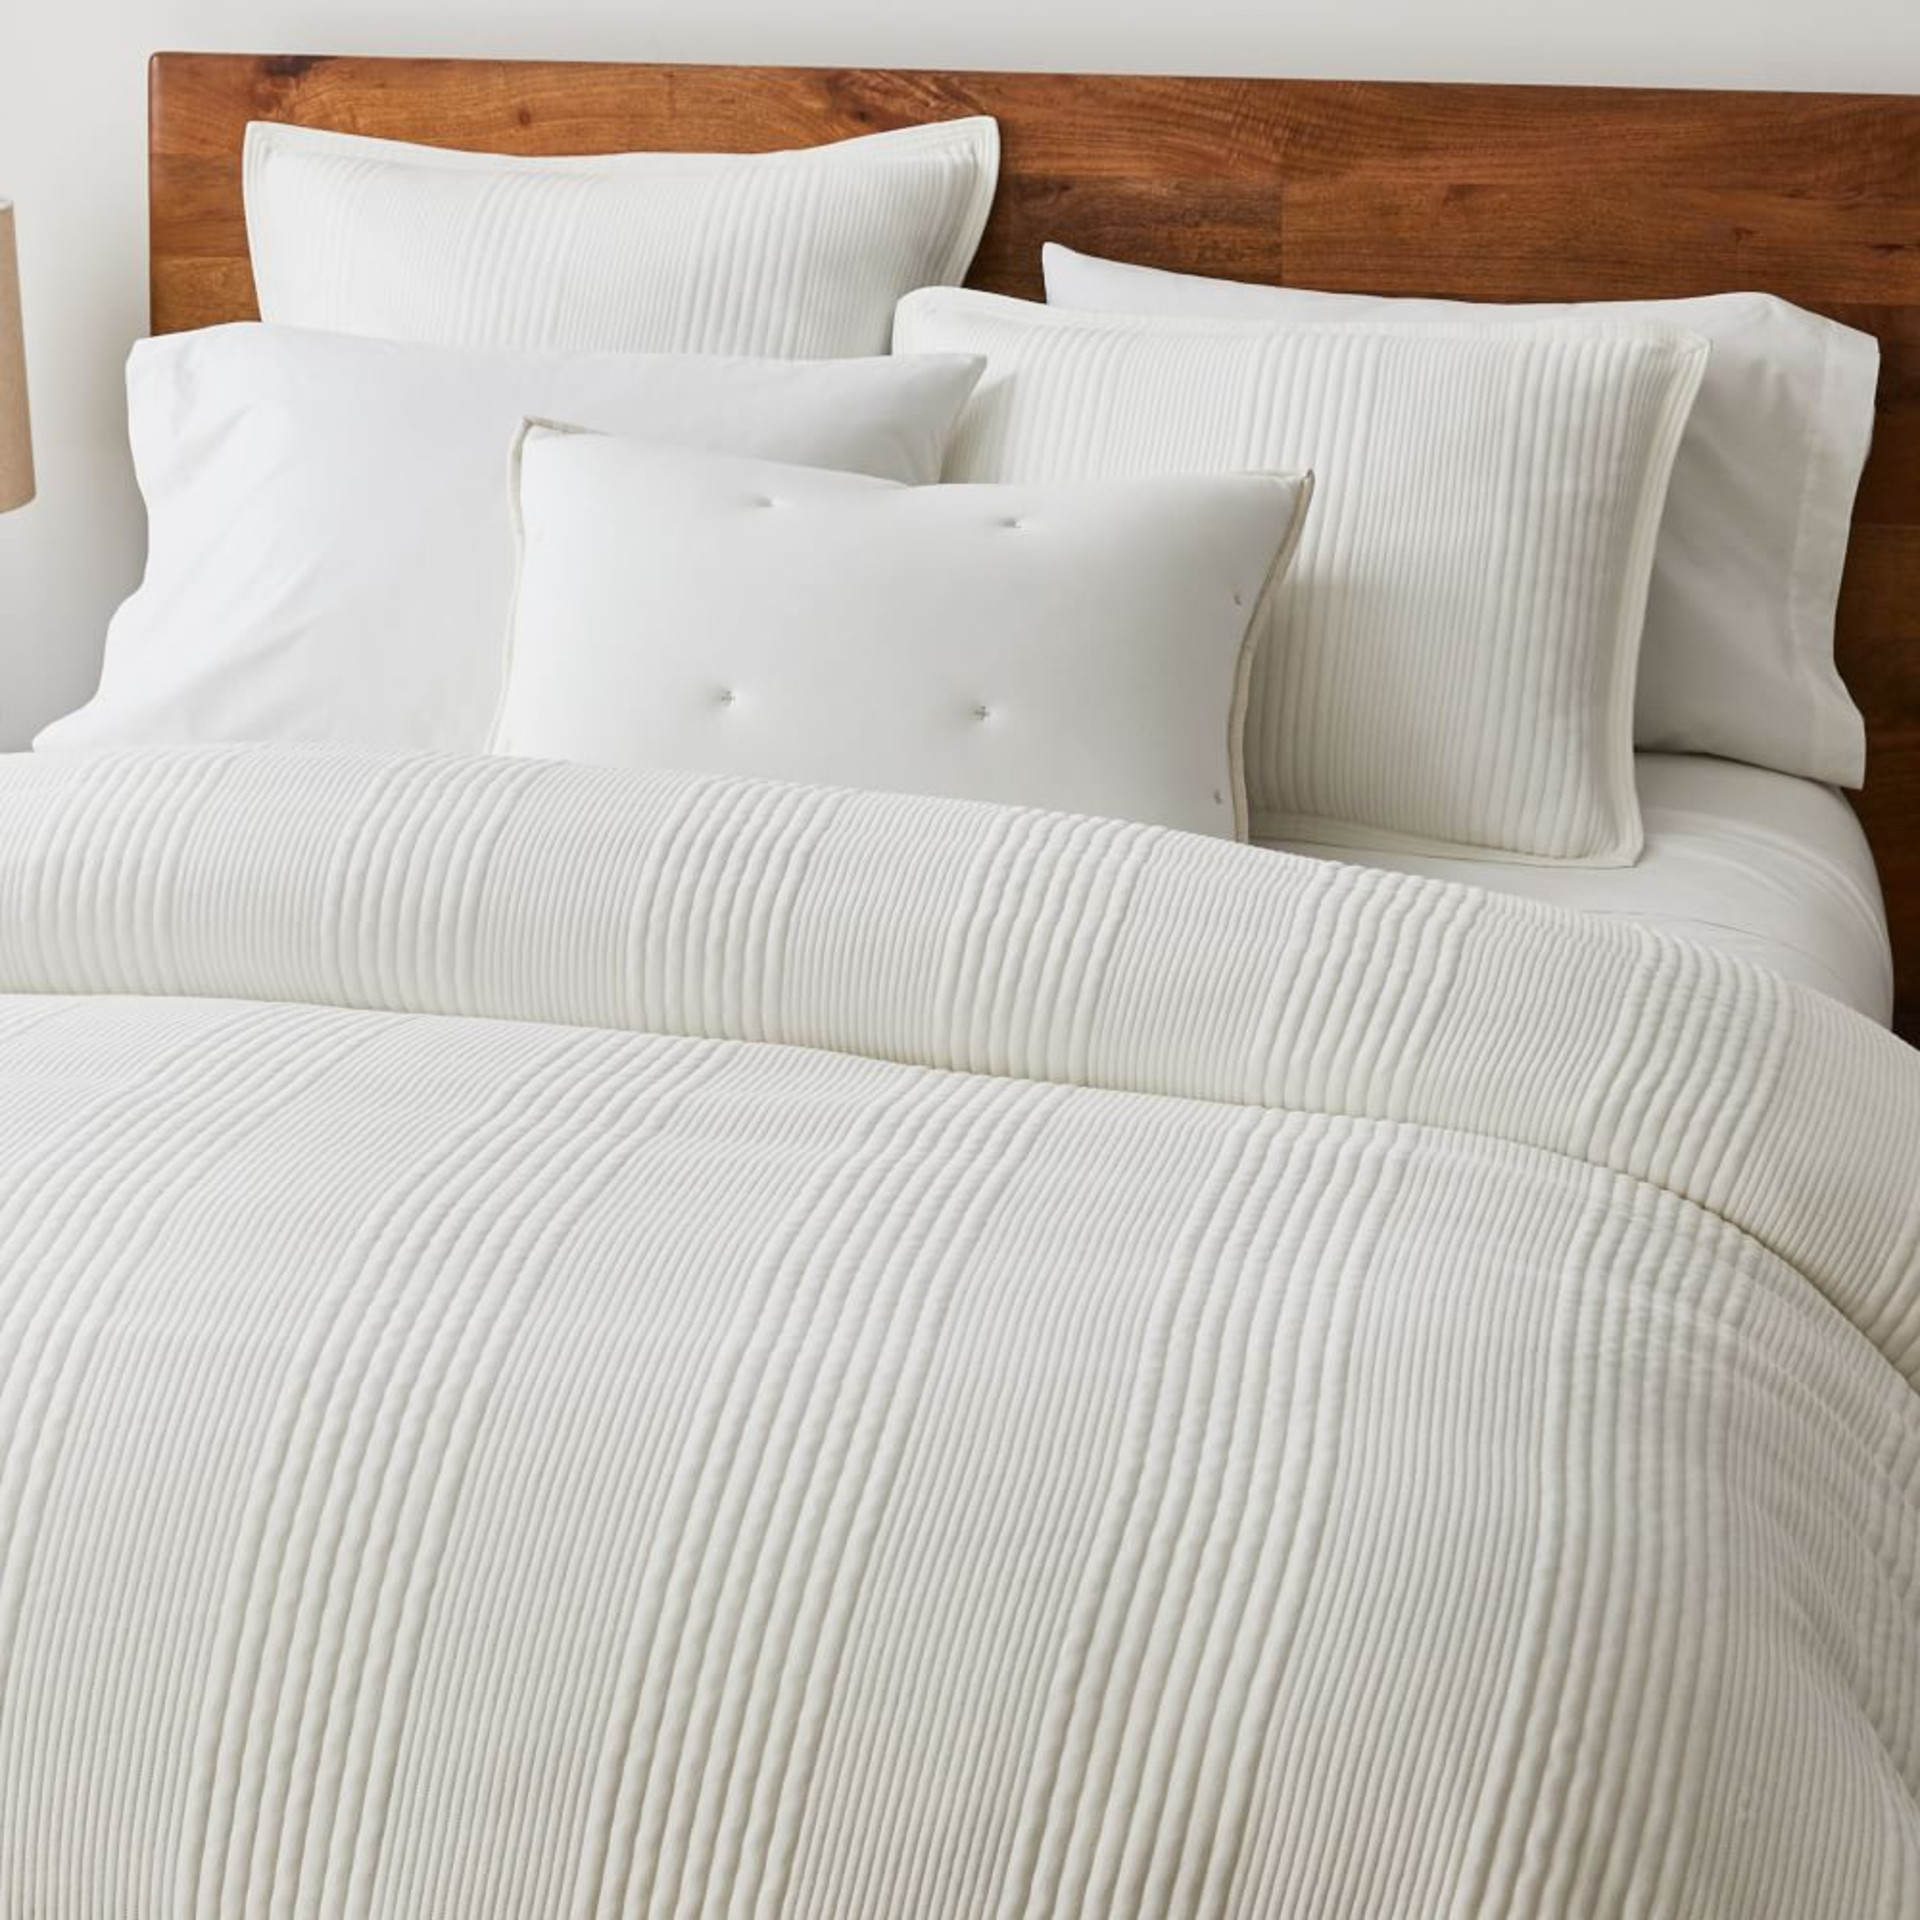 9 jersey bedding sets to keep you cosy on chilly autumn nights